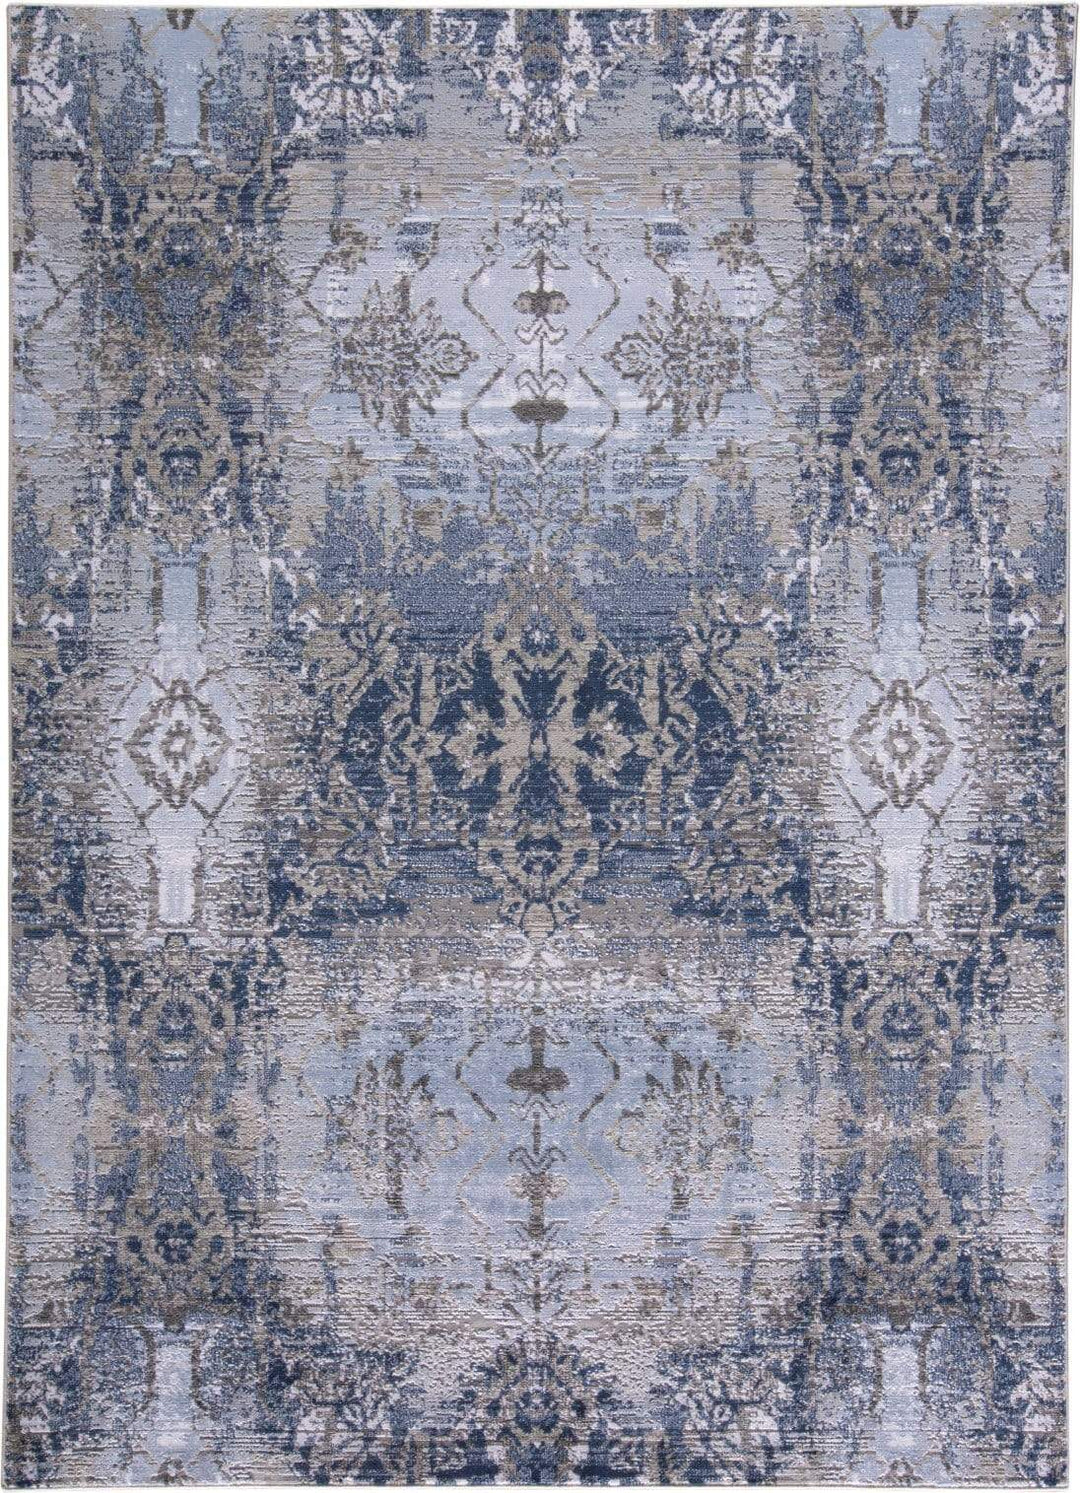 Feizy Feizy Gaspar Modern Abstract Deco Rug - Ice Blue & Navy Blue - Available in 6 Sizes 5'-2" x 7'-2" 7873834FLBLSLGE80